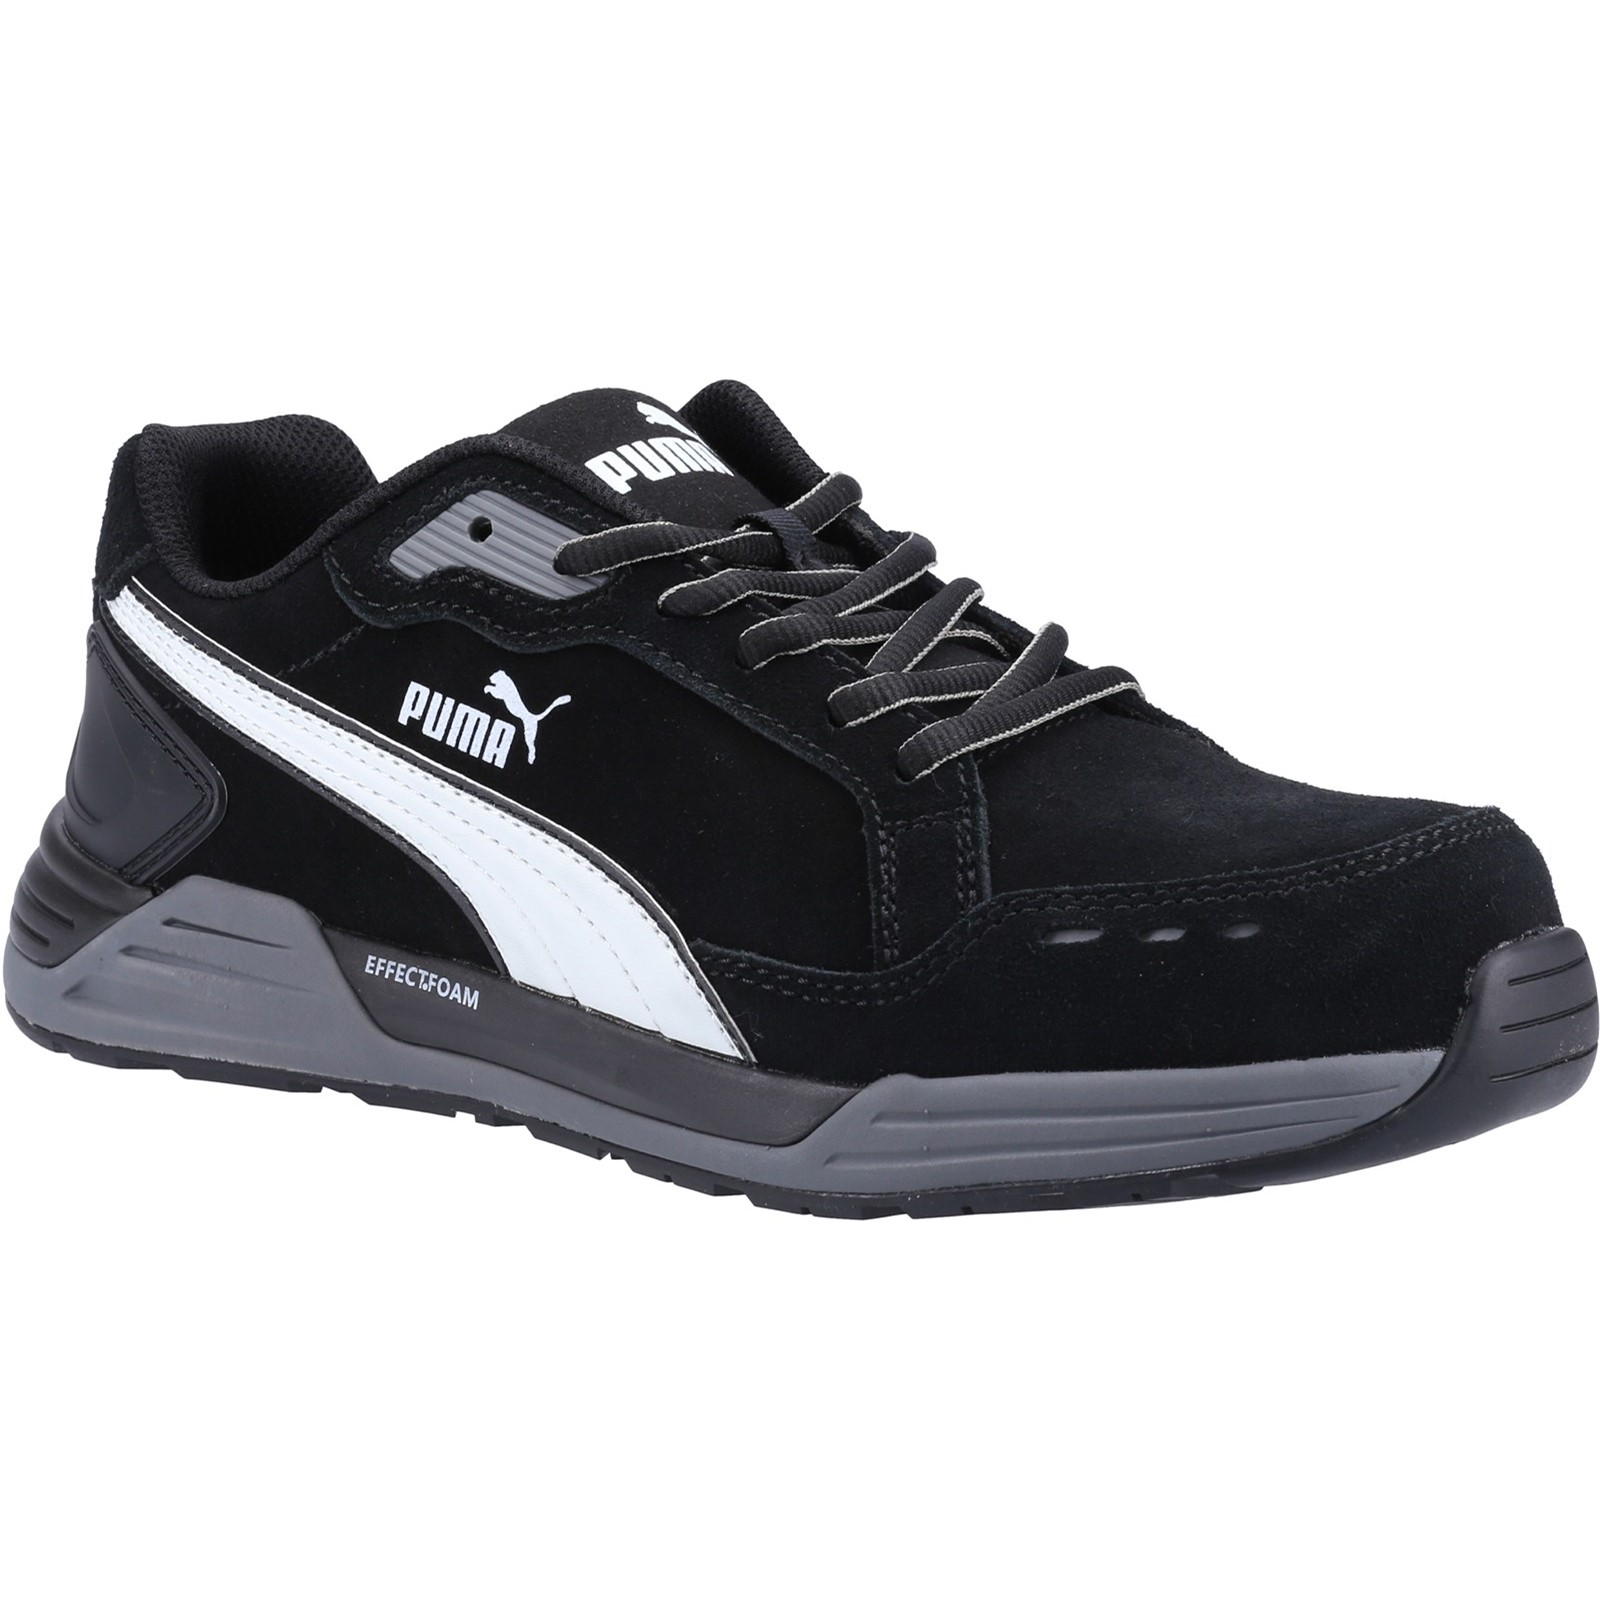 Airtwist Low S3 Safety Trainer